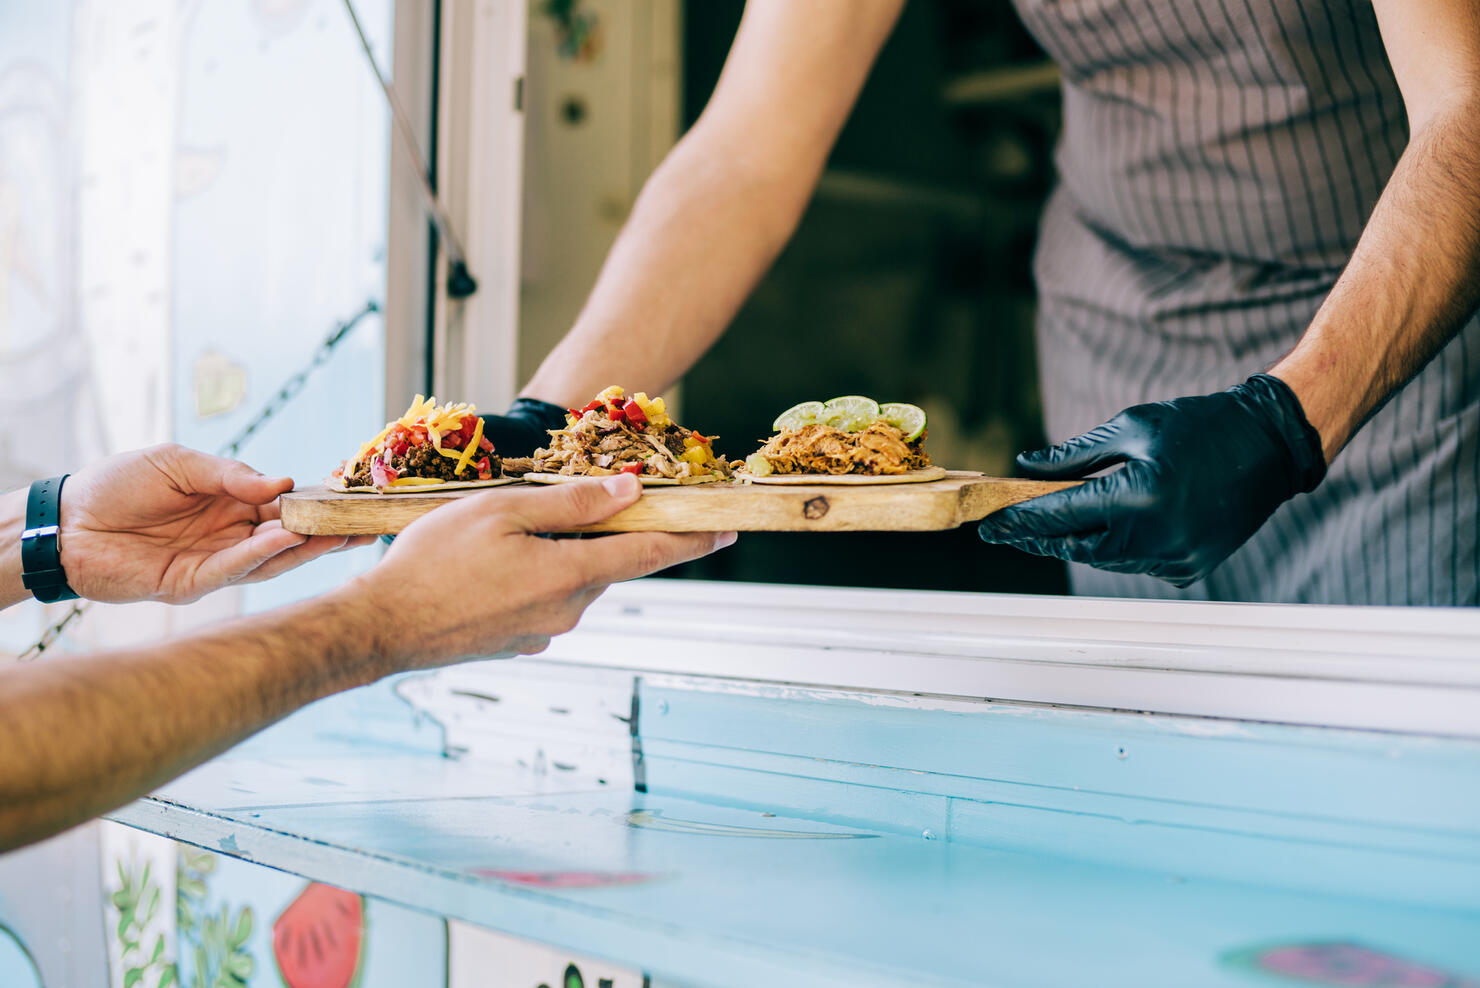 Food truck owner serving tacos to male customer.